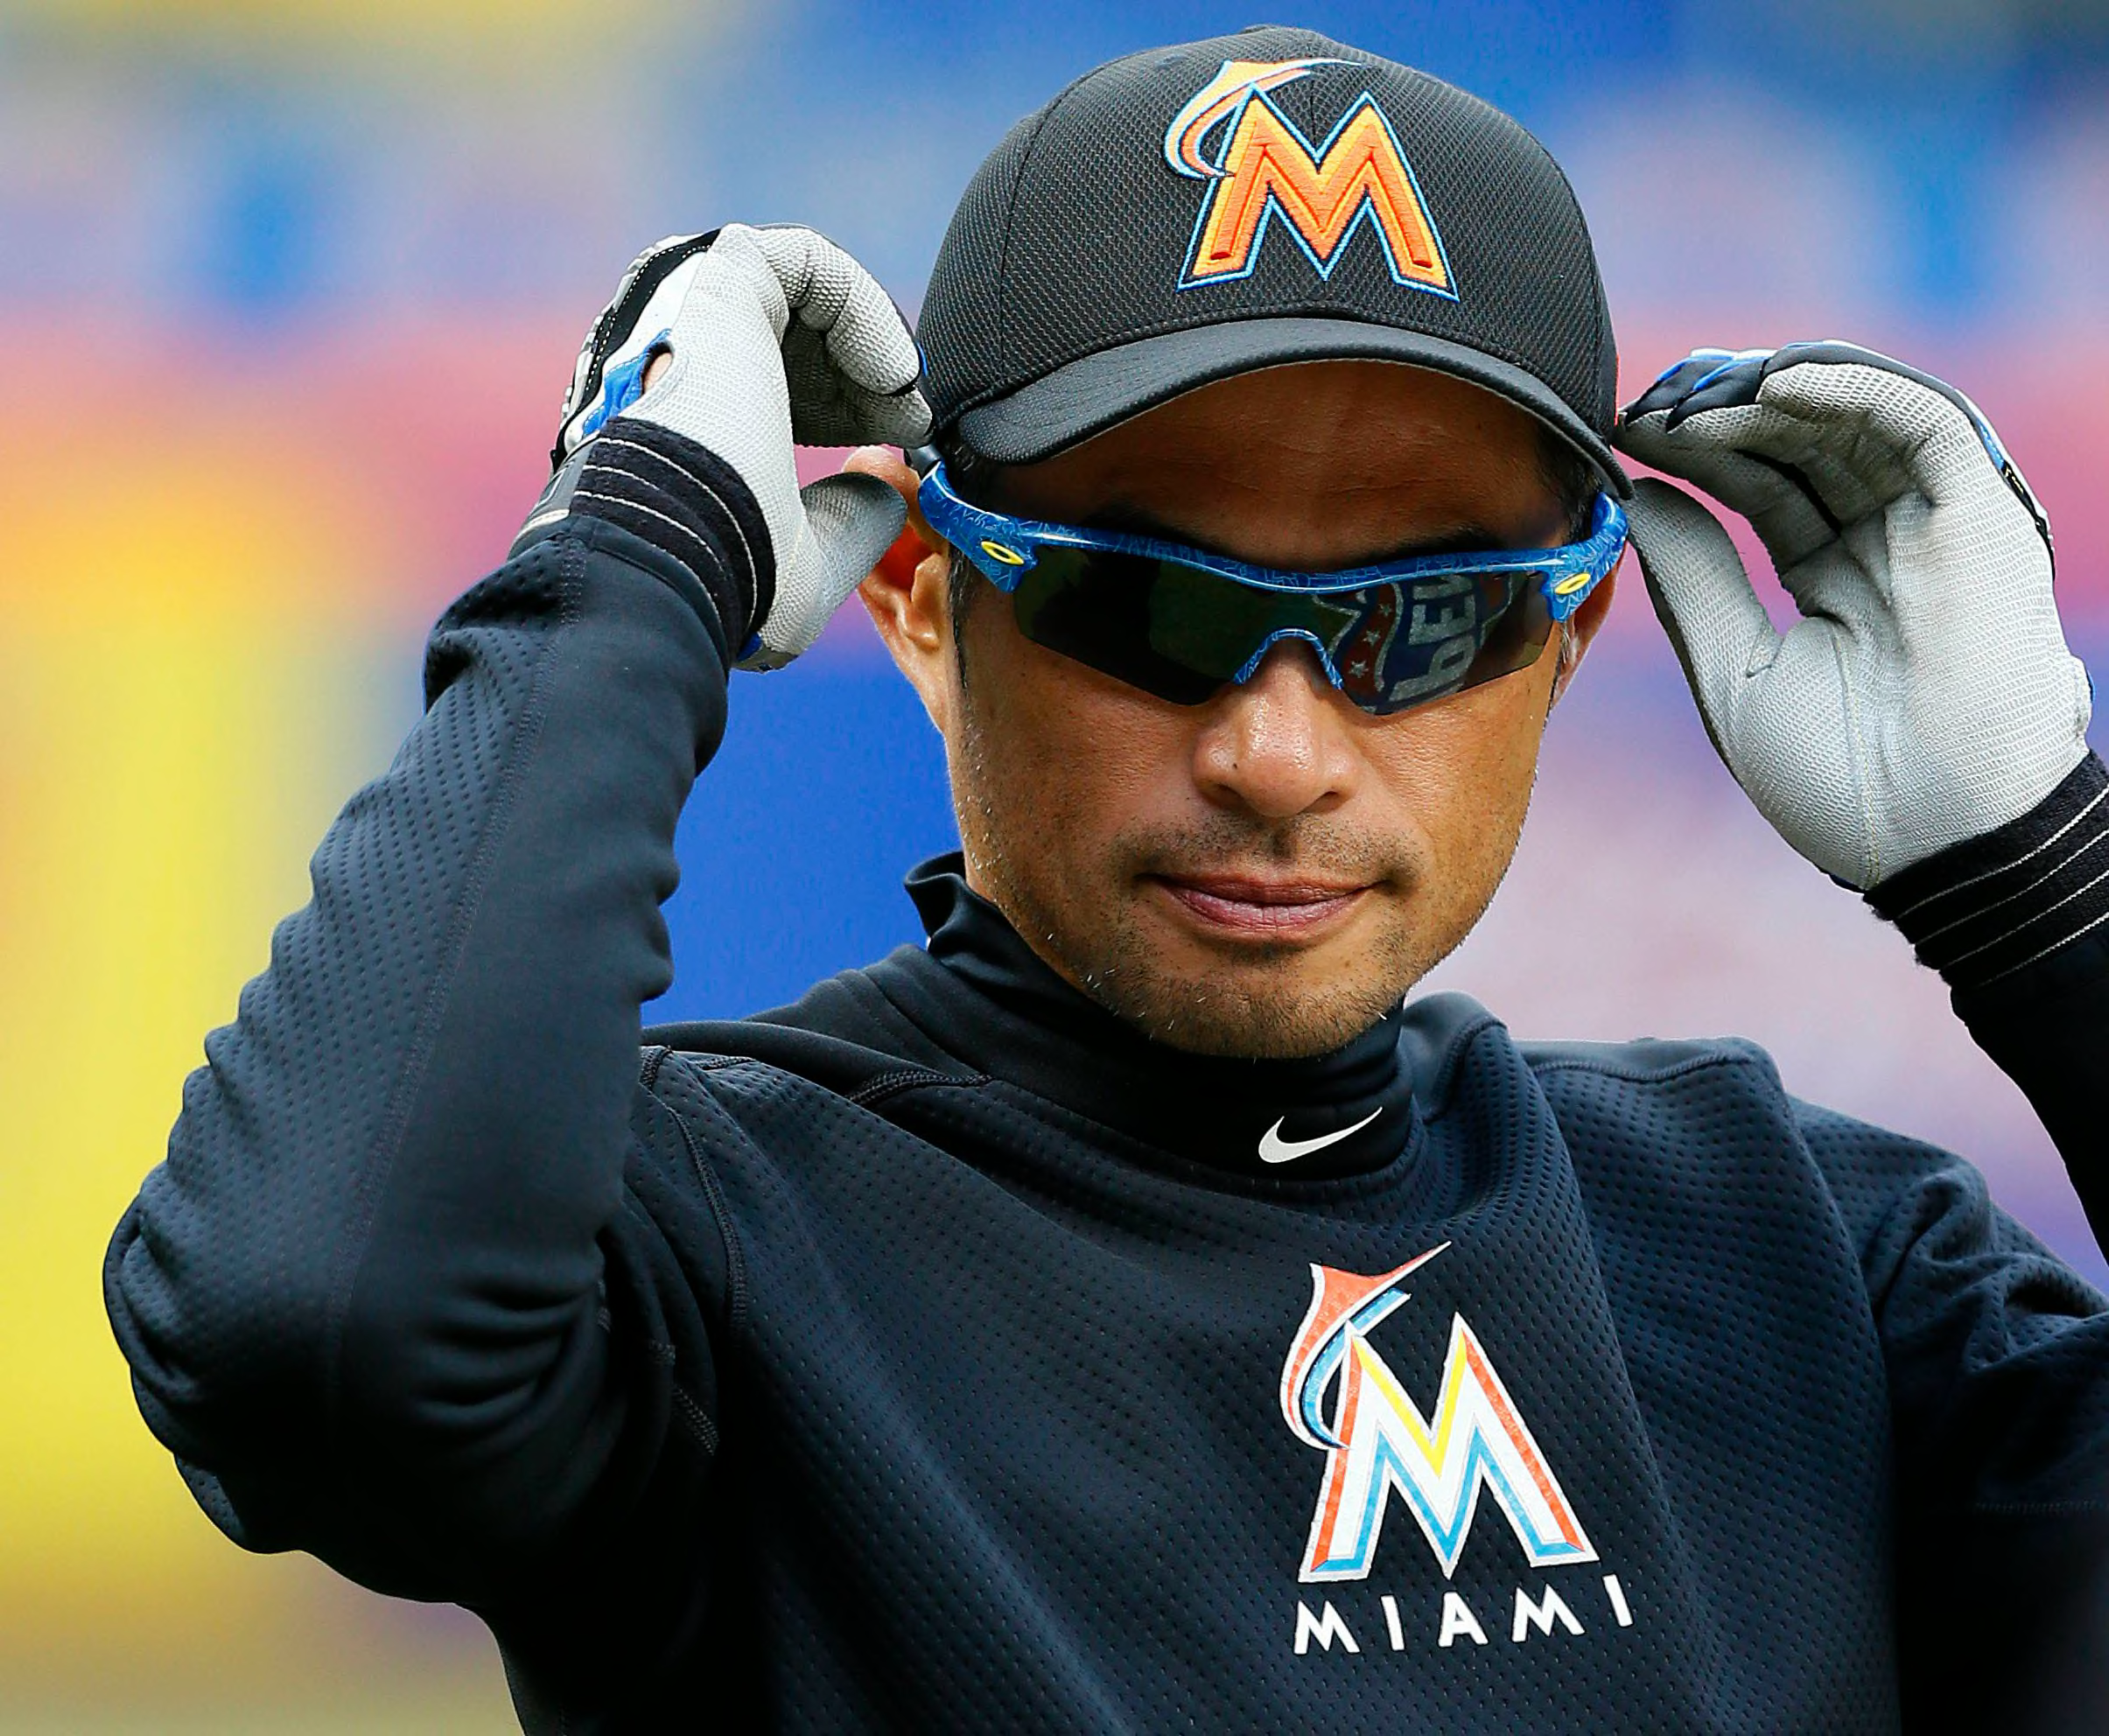 The Greatest Miami Marlins Right Fielder of All Time